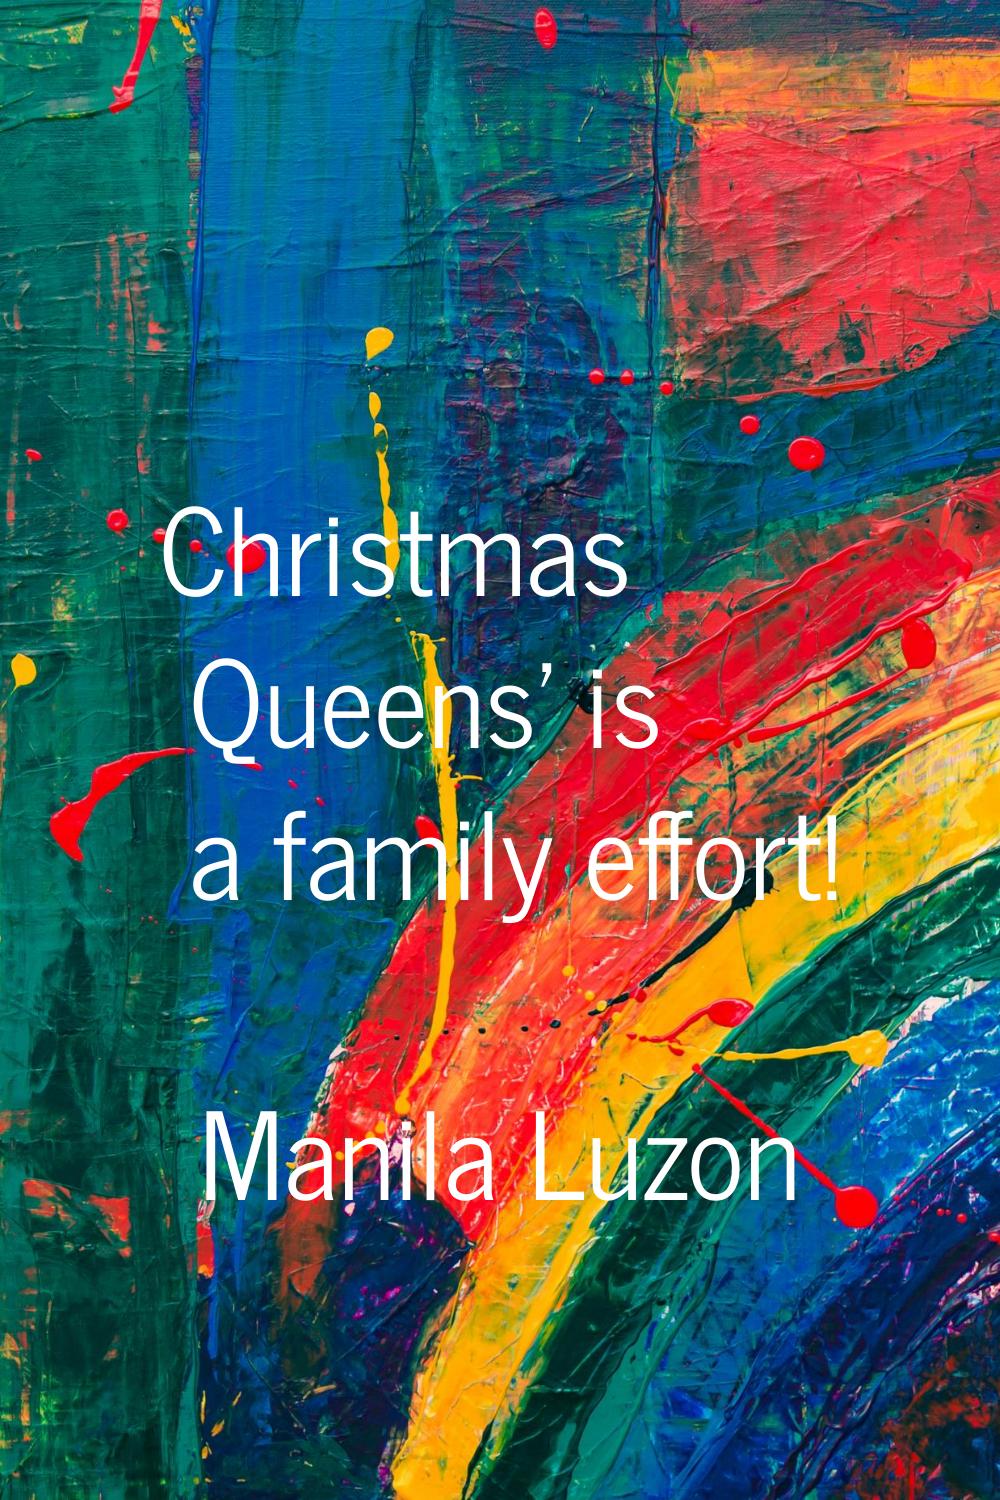 Christmas Queens' is a family effort!